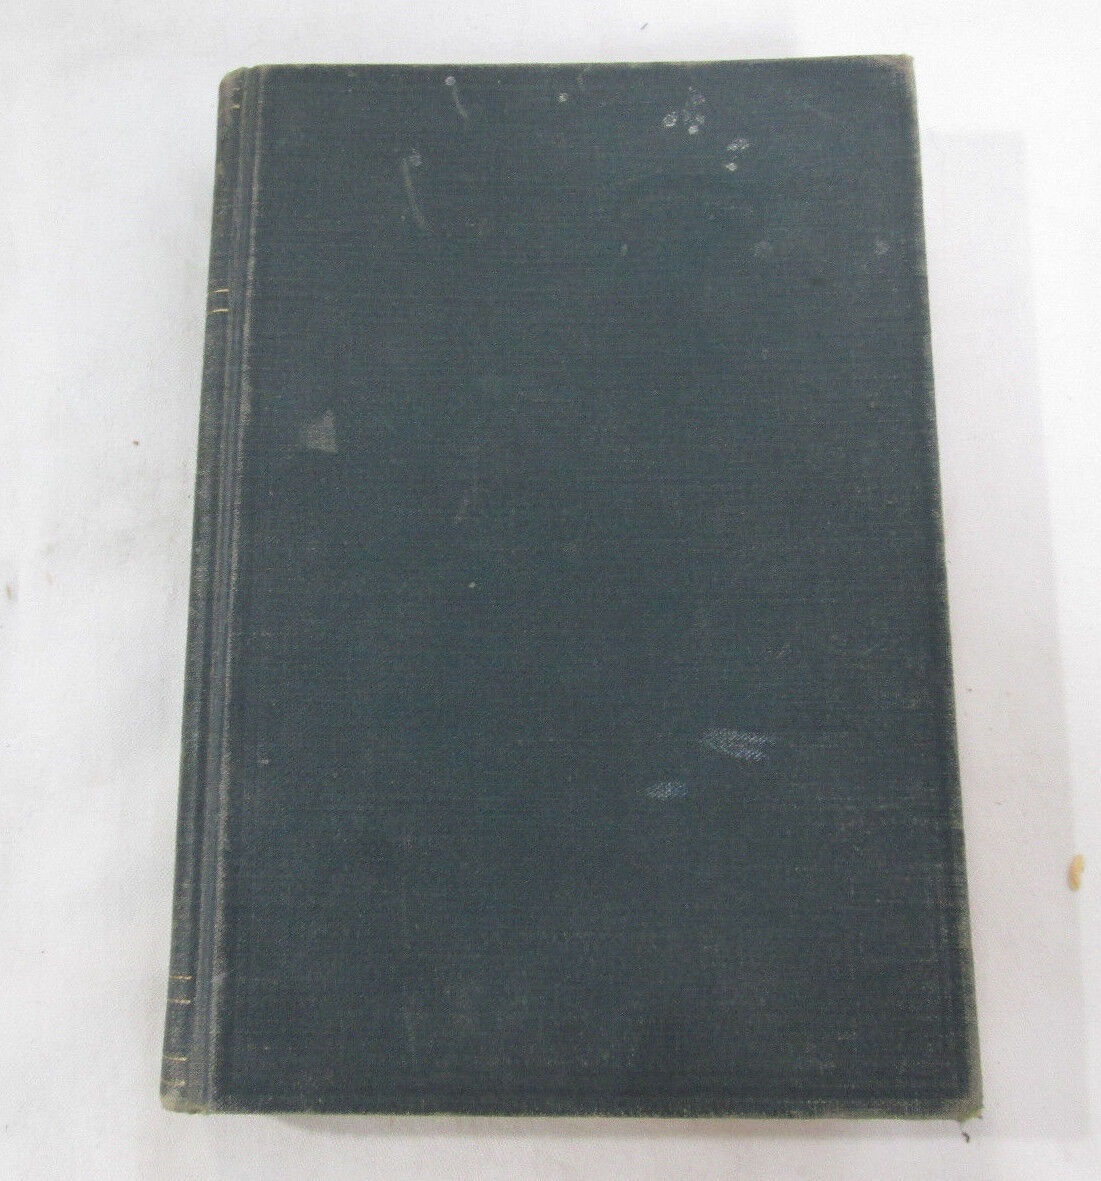 Antique, Peloubet\'s Select Notes on the International S.S. Lessons 1912 C.1911